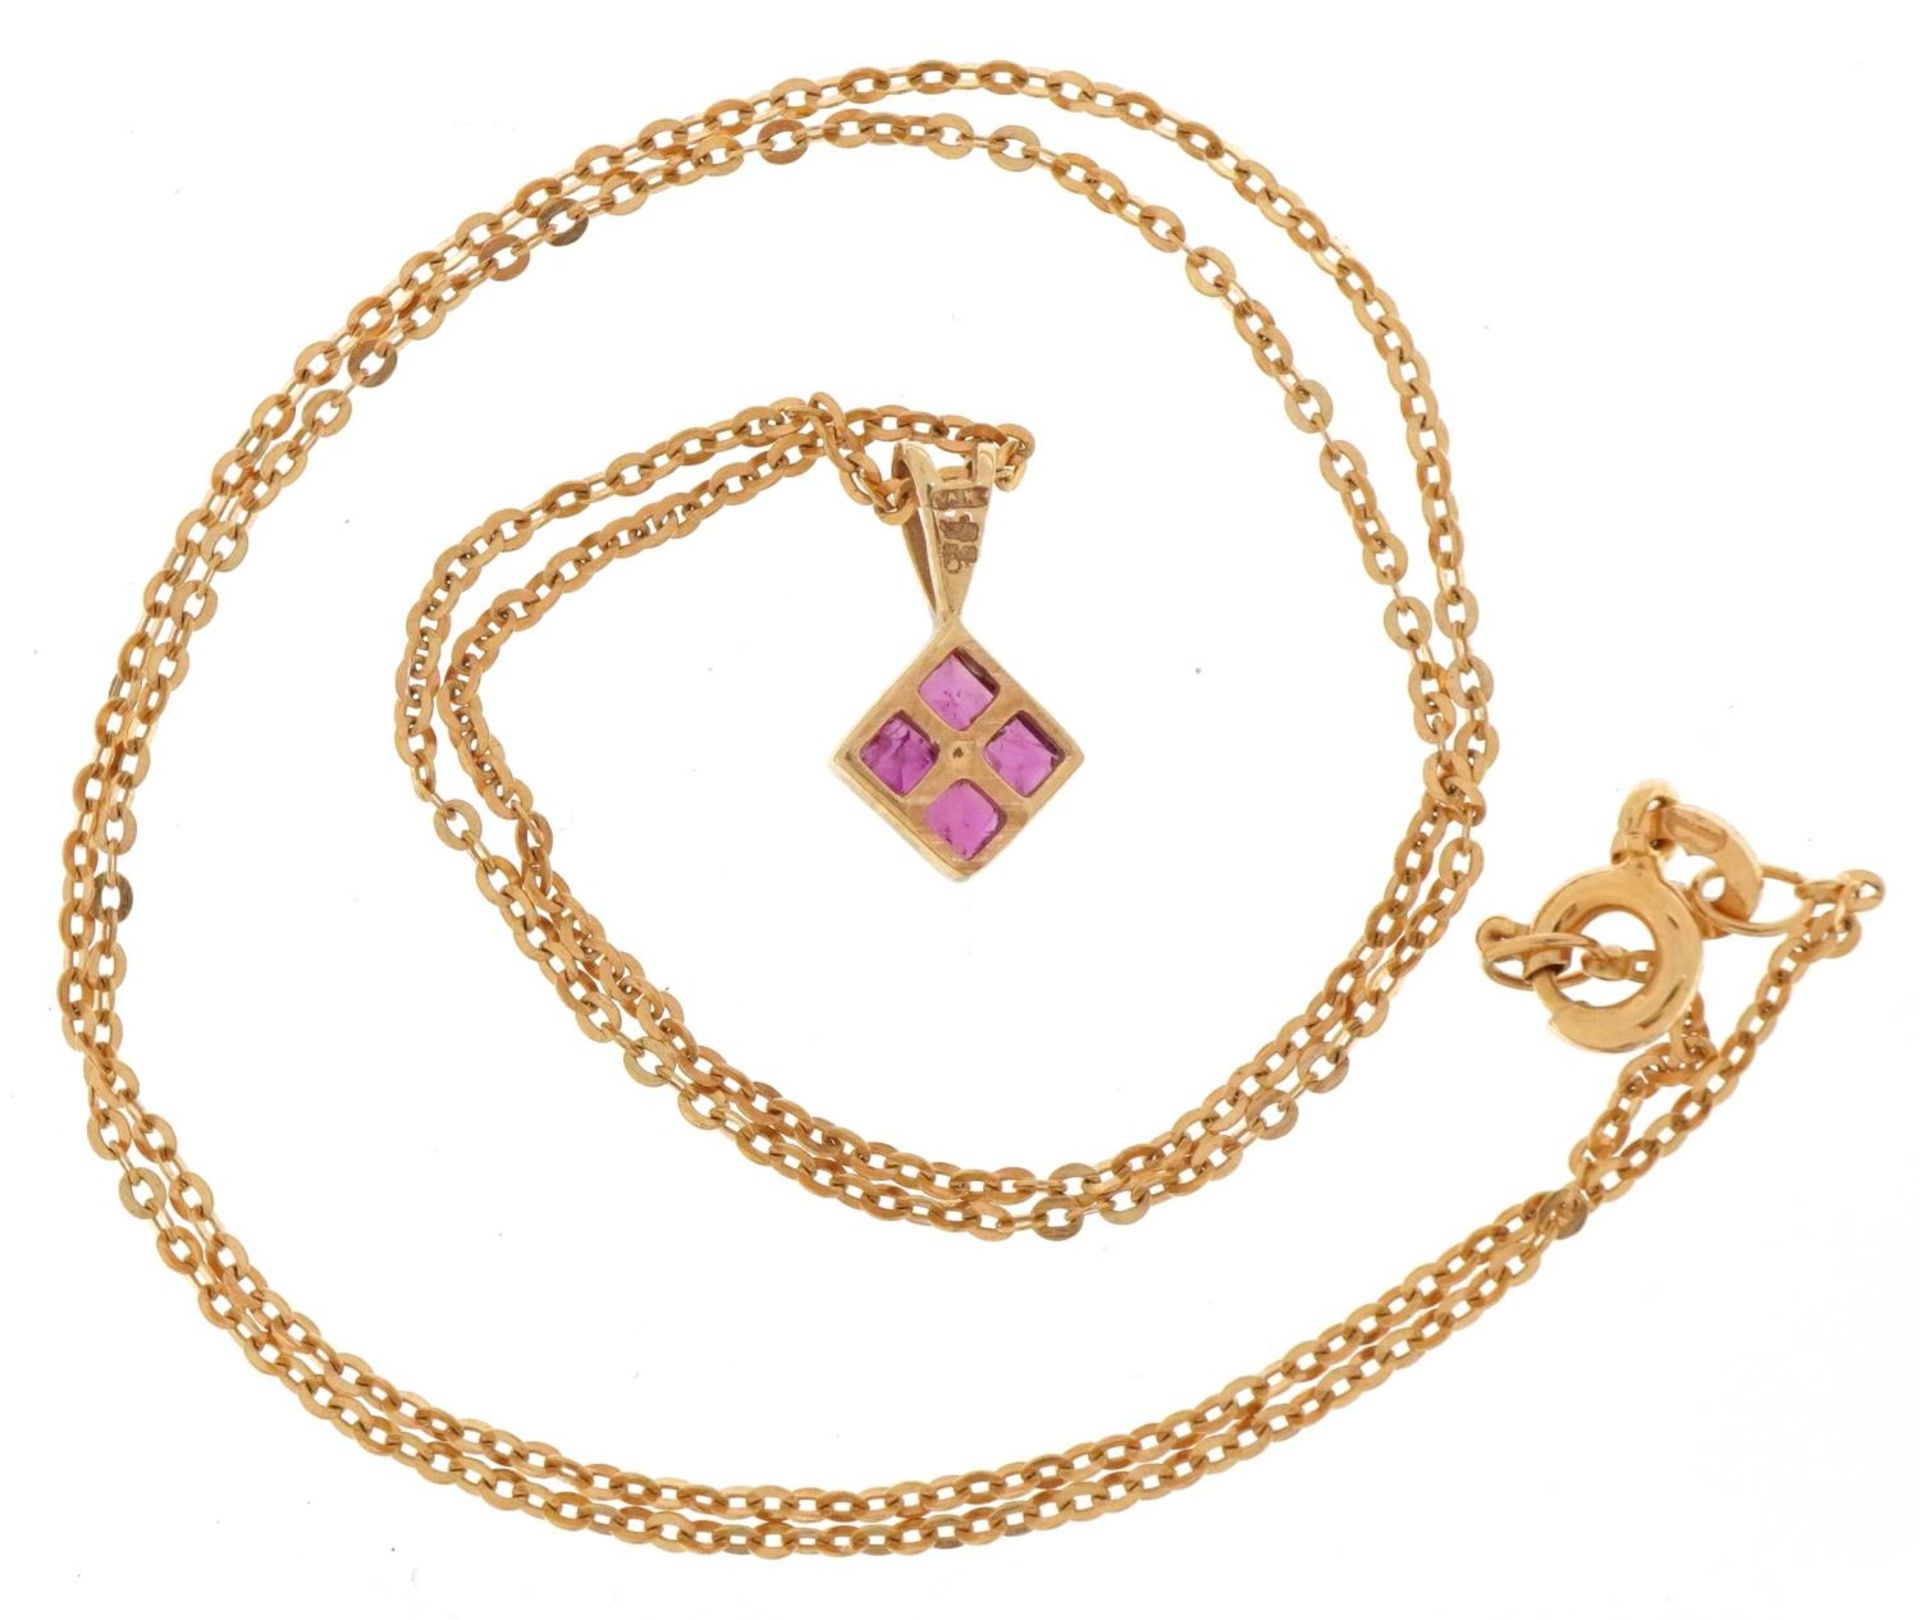 9ct gold pink spinel and diamond pendant on a Italian Unoaerre 14ct gold necklace, 1.3cm high and - Image 3 of 4